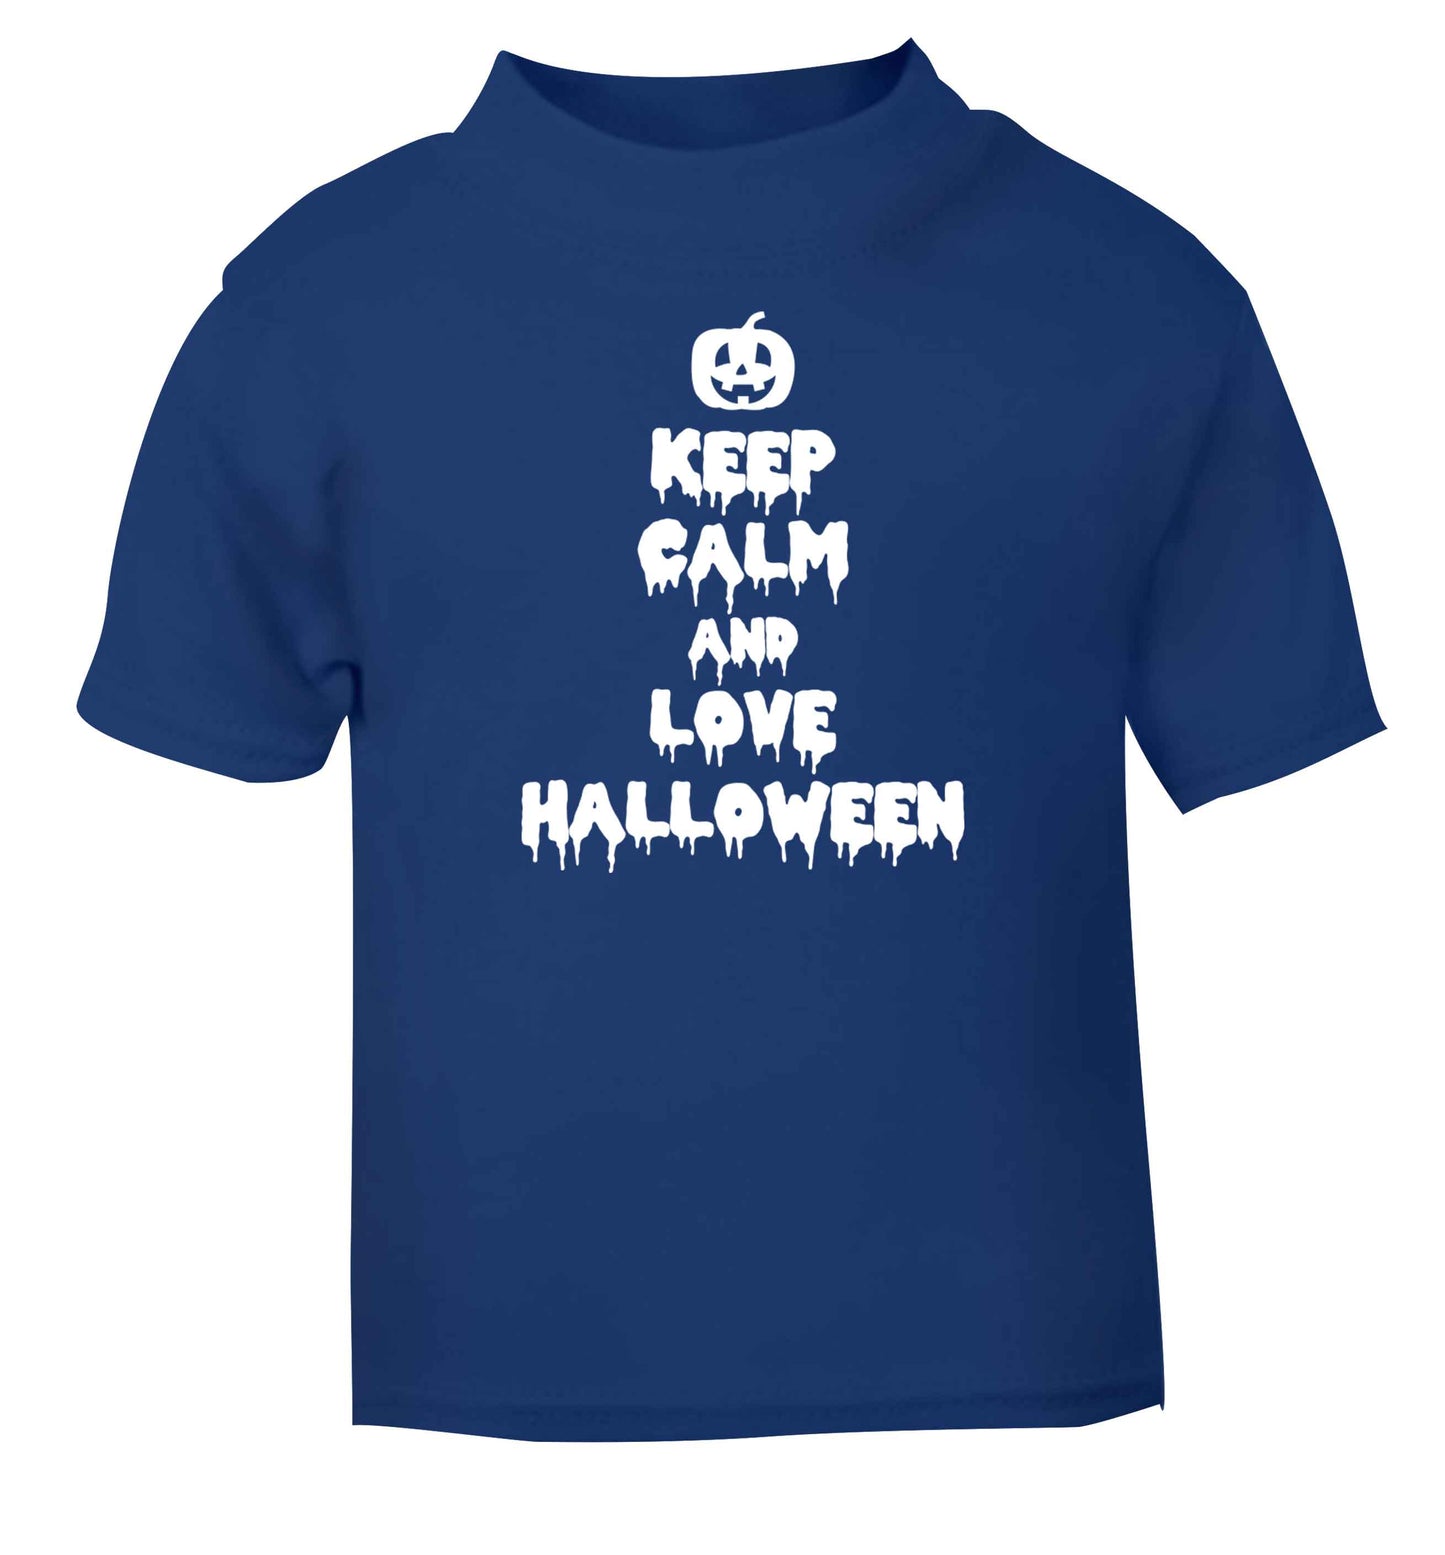 Keep calm and love halloween blue baby toddler Tshirt 2 Years